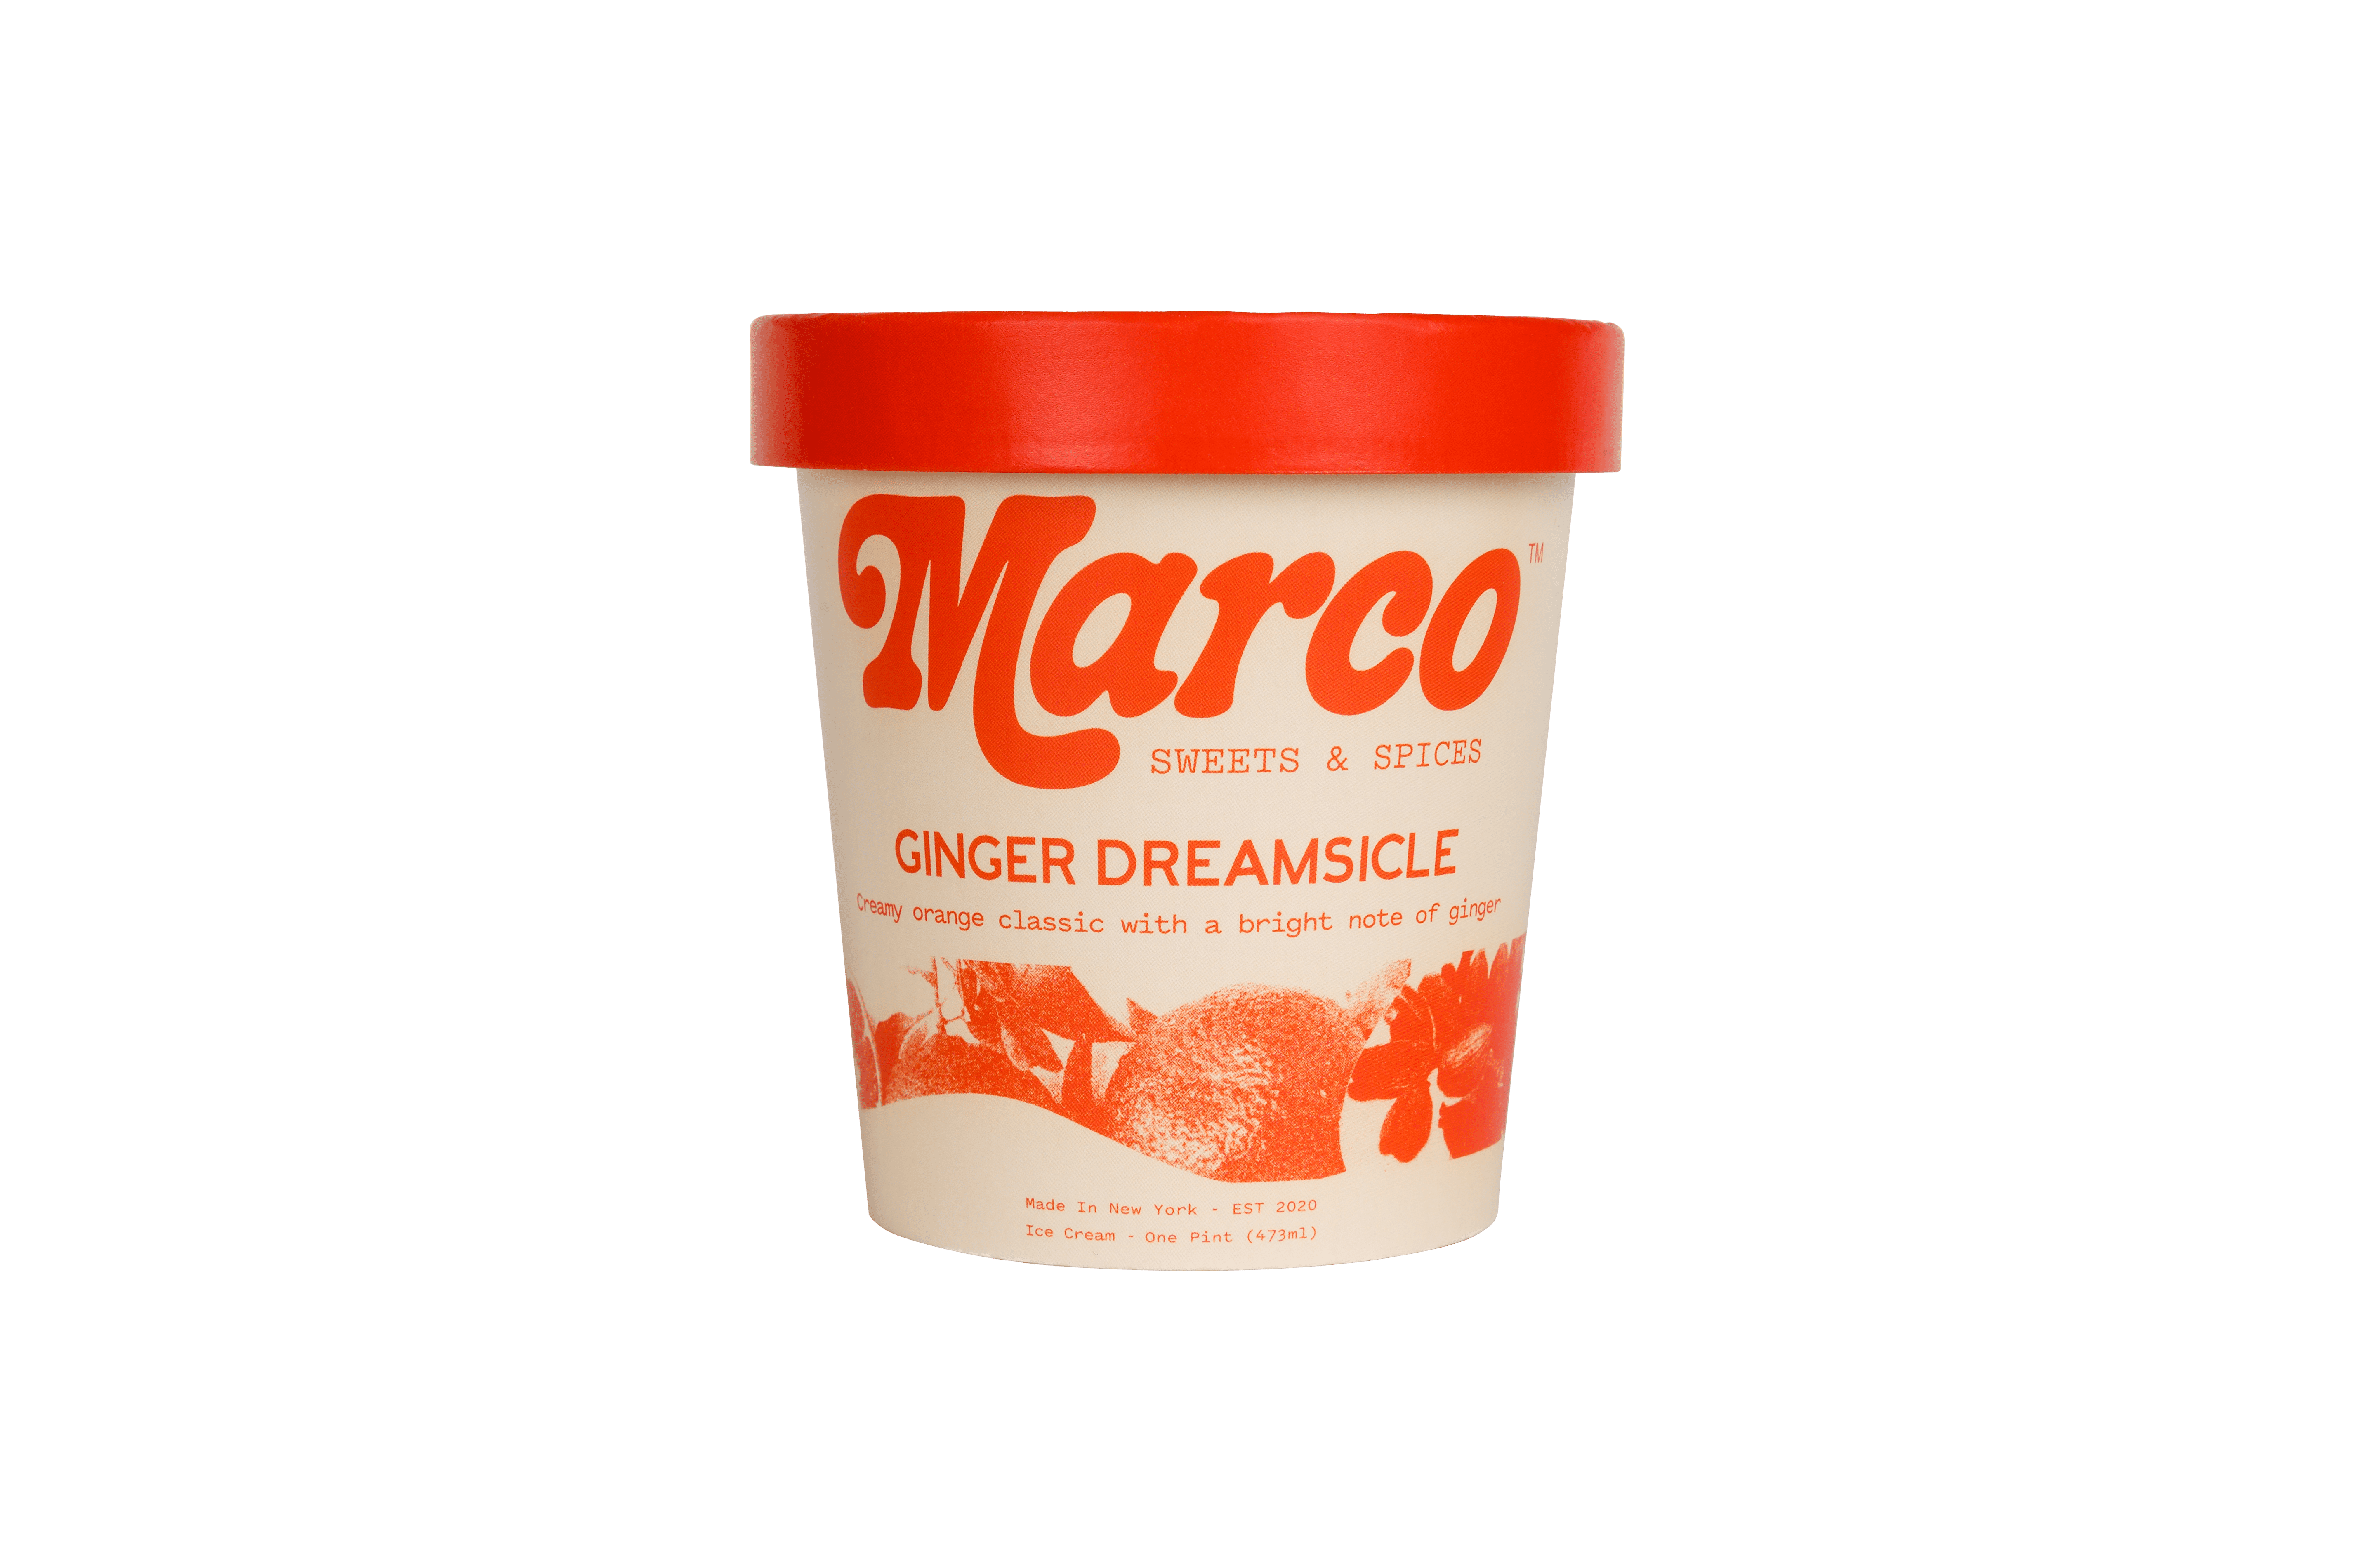 Marco Sweets Ginger Dreamsicle Ice Cream Pint 8 units per case 16.0 oz